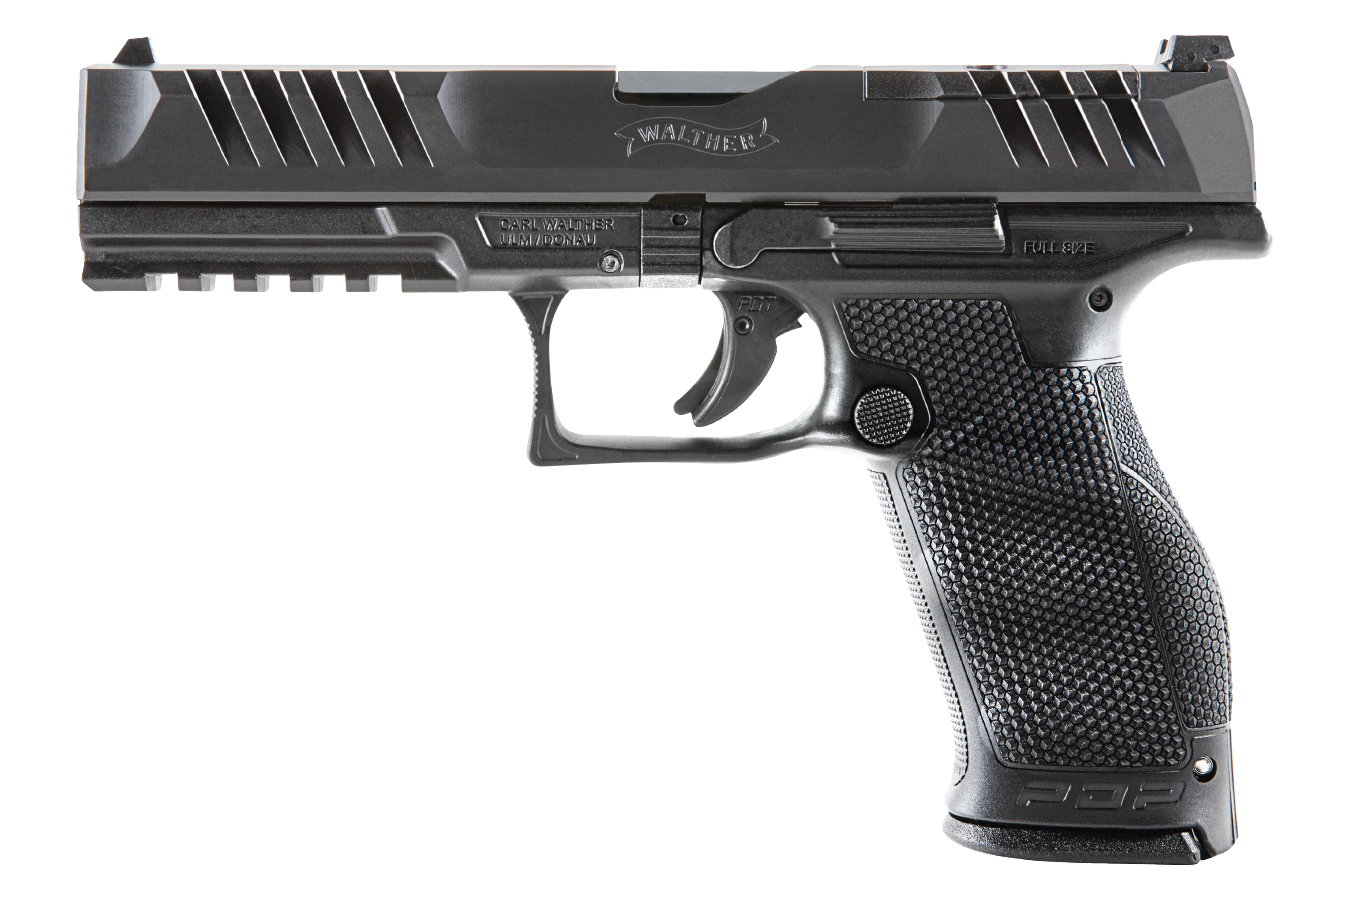 PDP FULL-SIZE OPTICS READY STRIKER-FIRED PISTOL WITH 5 INCH BARREL AND TRITIUM 